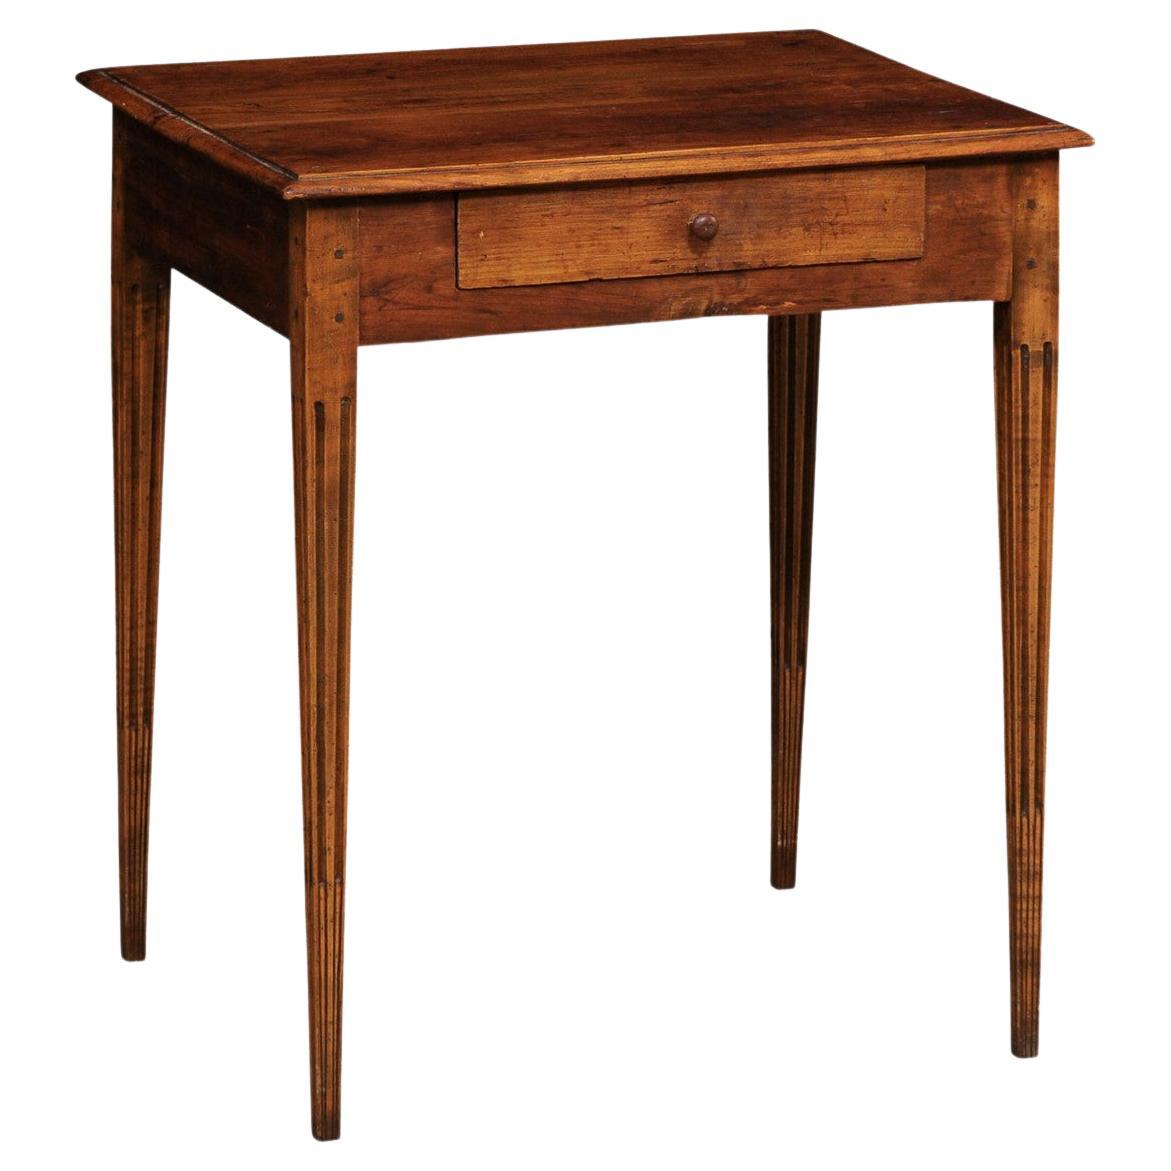 Italian 19th C. Side Table w/Single Drawer, Raised on Fluted & Tapering Legs